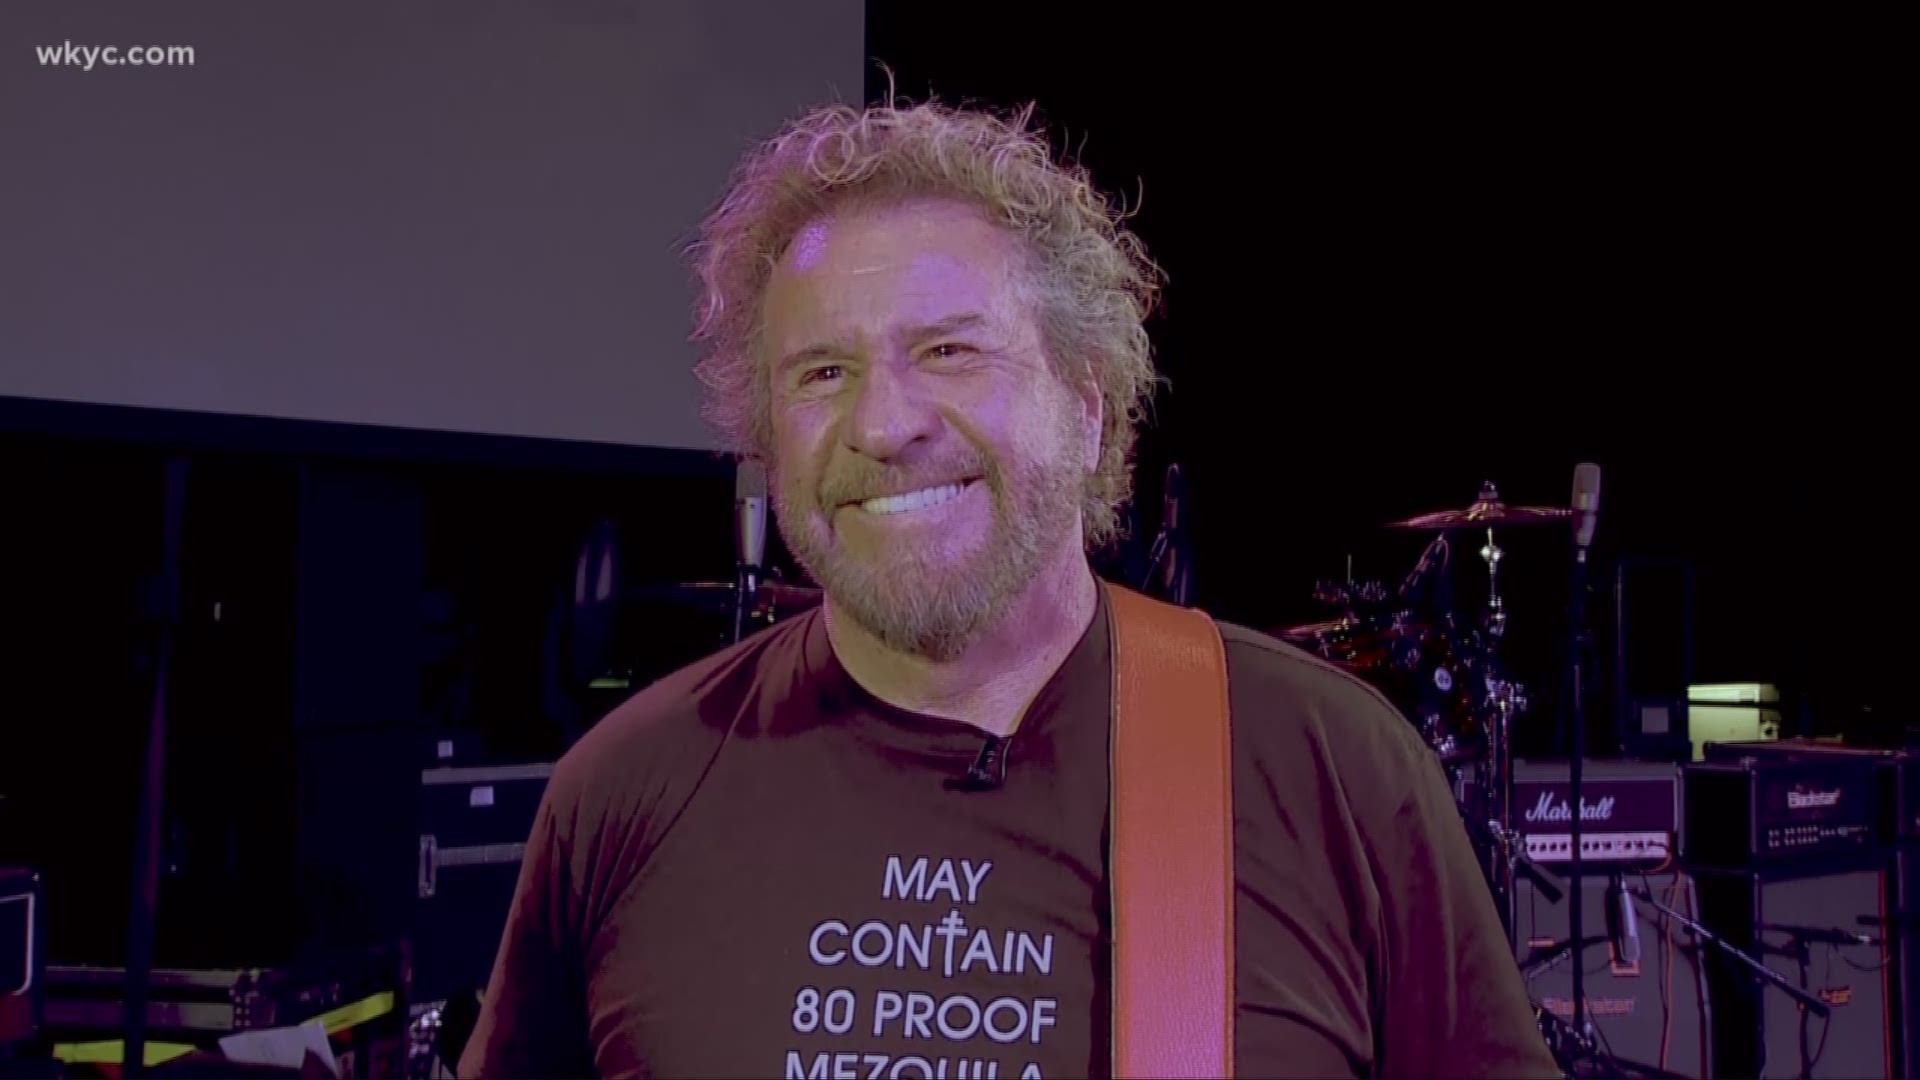 Rock and Roll Hall of Famer Sammy Hagar performed recently at the Hard Rock Rocksino and we caught up with him beforehand to talk about a number of subjects.